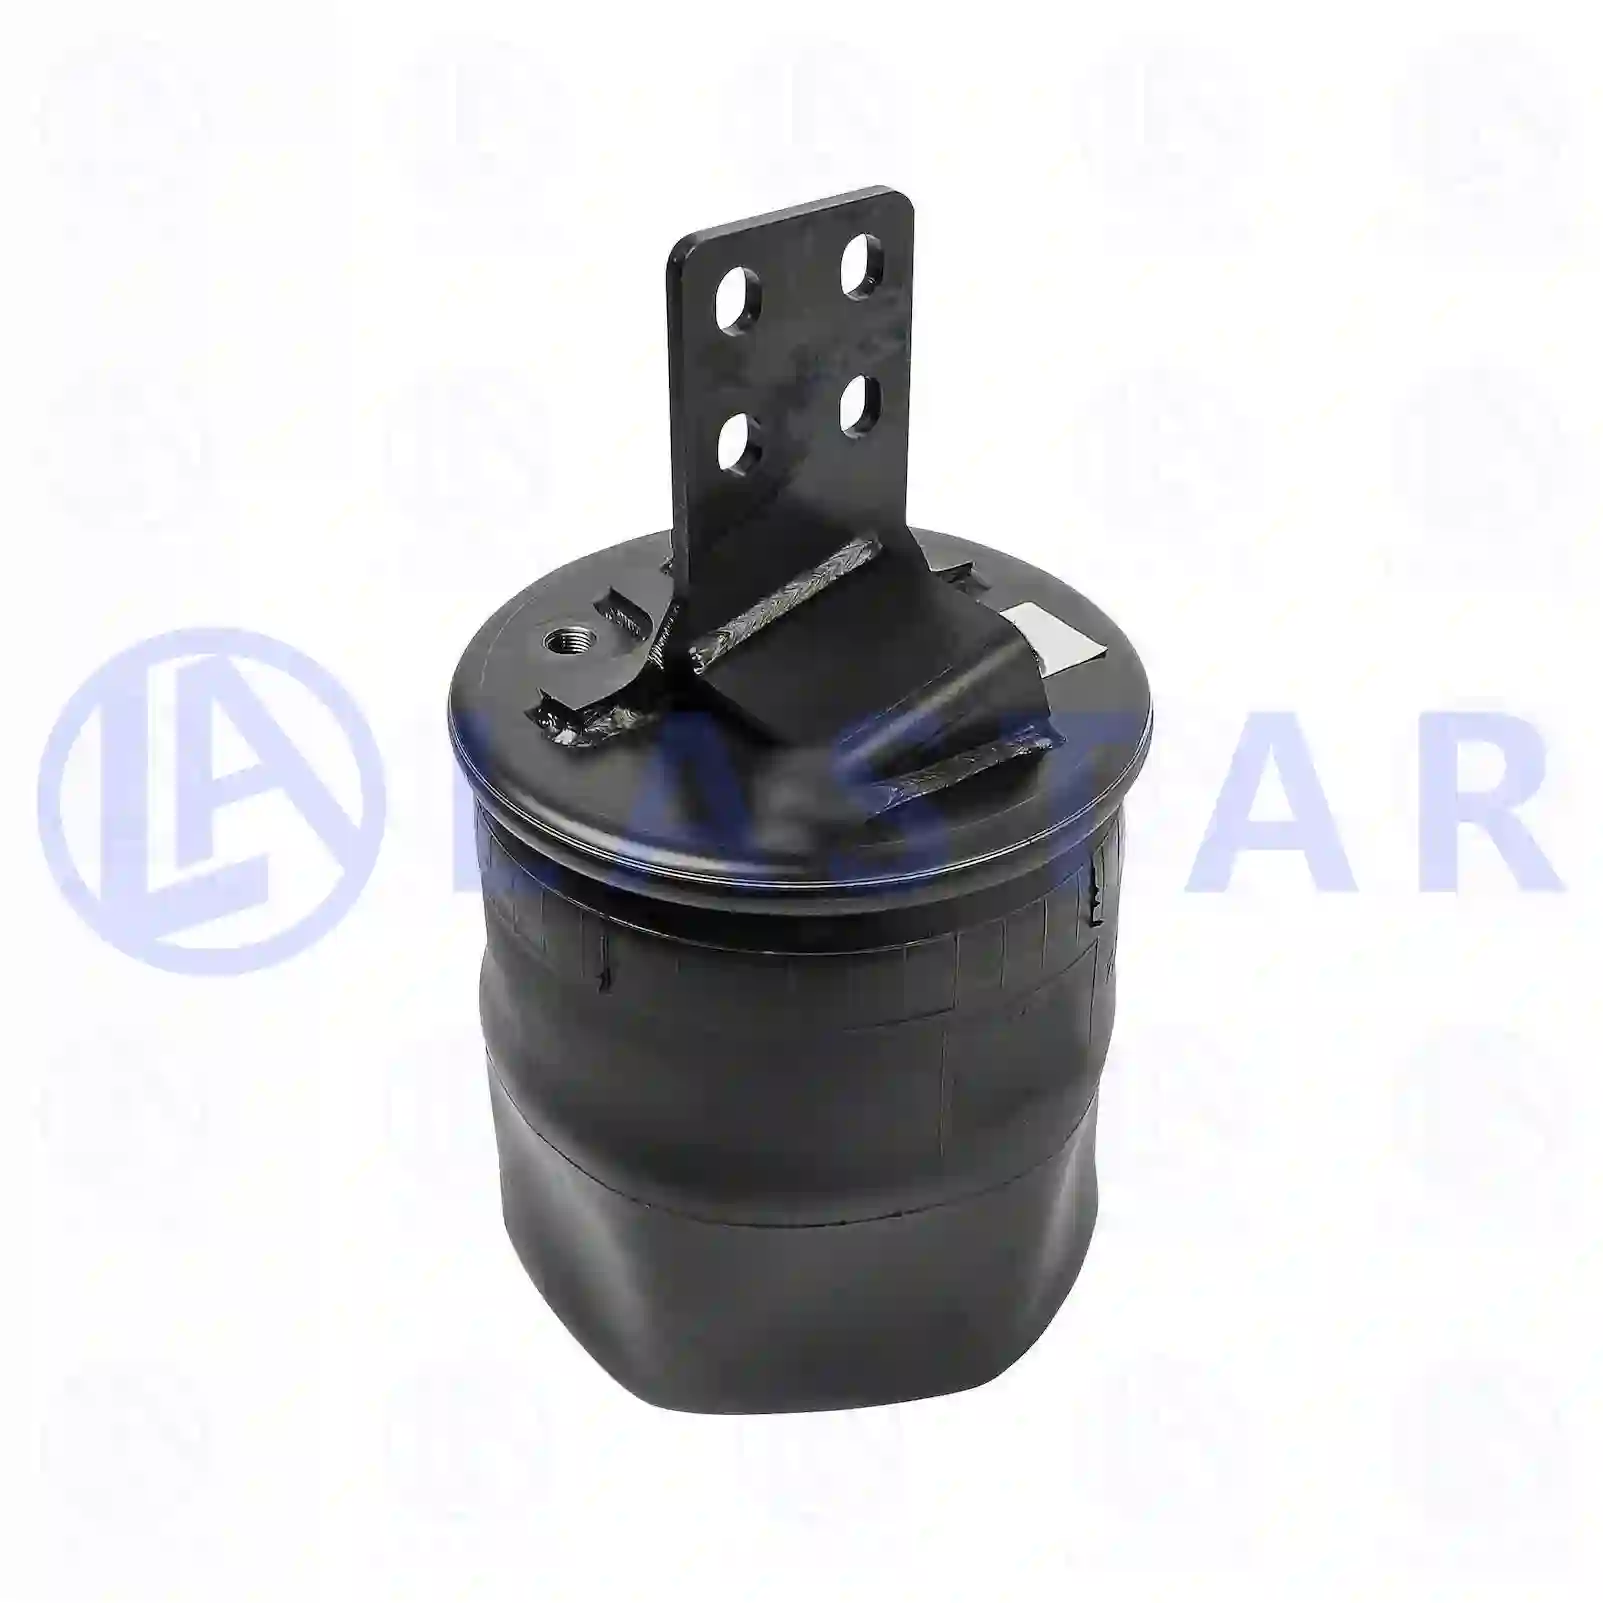 Air spring, without piston, 77729315, 42559767 ||  77729315 Lastar Spare Part | Truck Spare Parts, Auotomotive Spare Parts Air spring, without piston, 77729315, 42559767 ||  77729315 Lastar Spare Part | Truck Spare Parts, Auotomotive Spare Parts